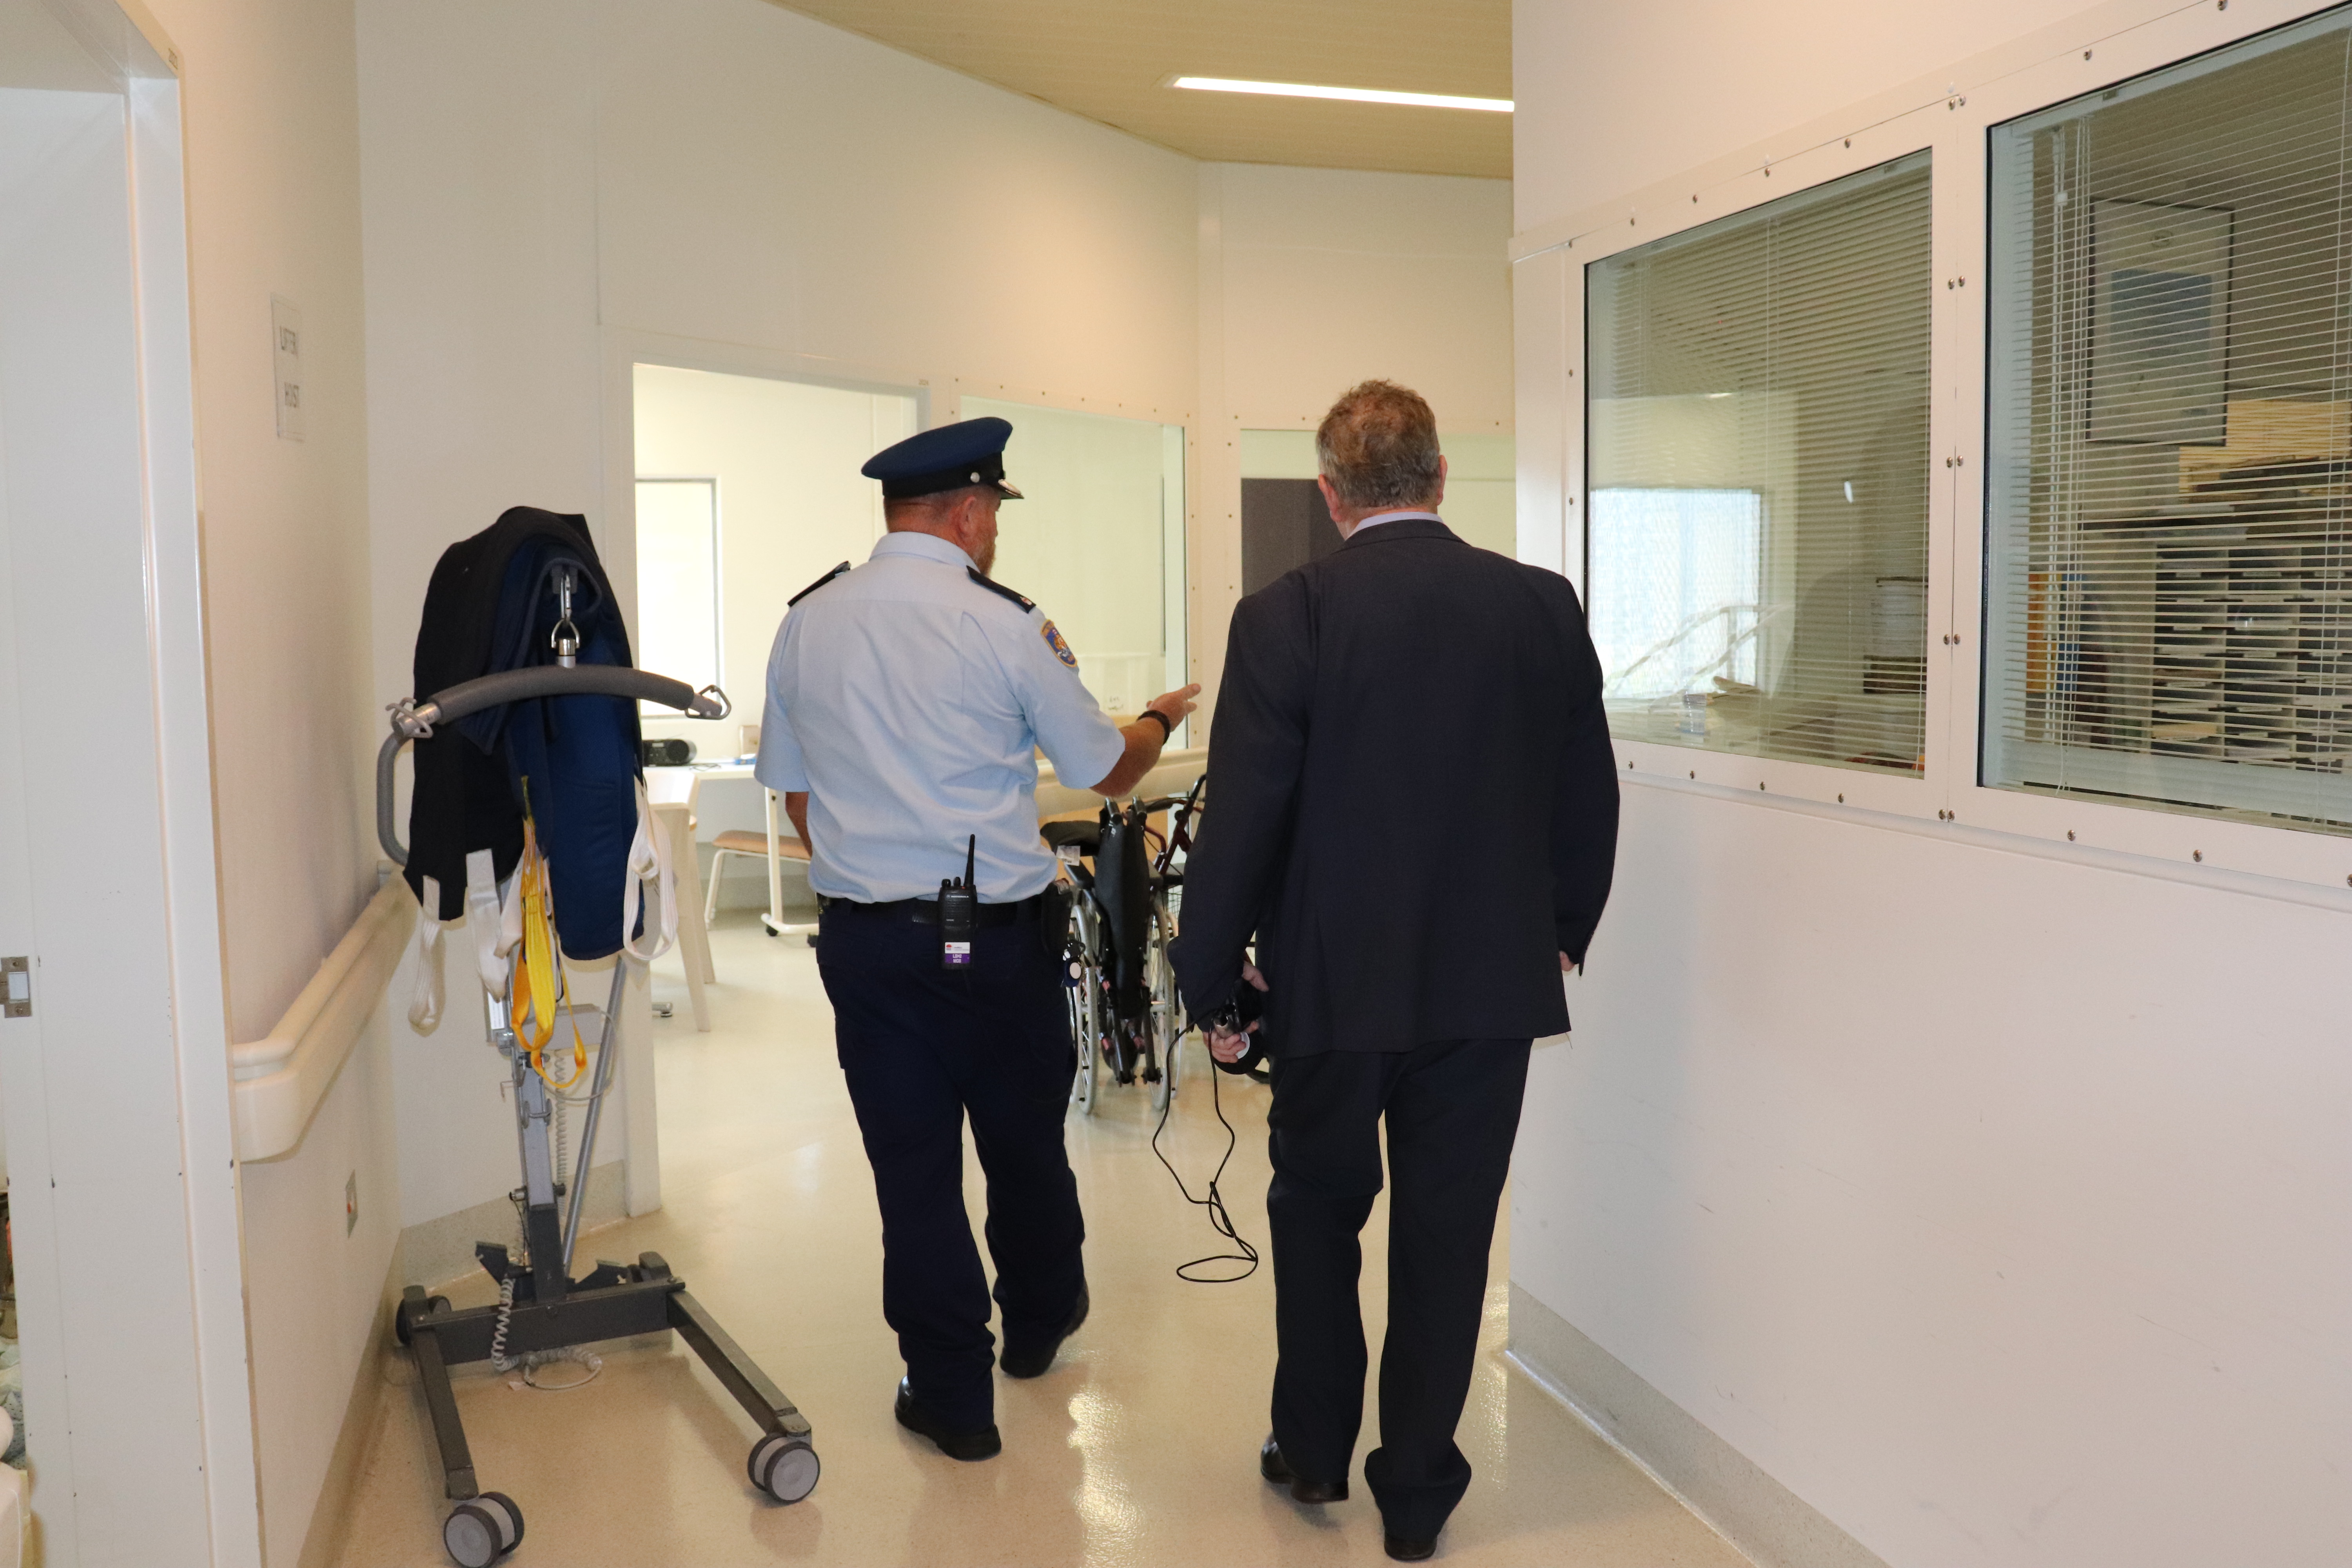 Courtesy of CSNSW - Tour of Long Bay Hospital 1